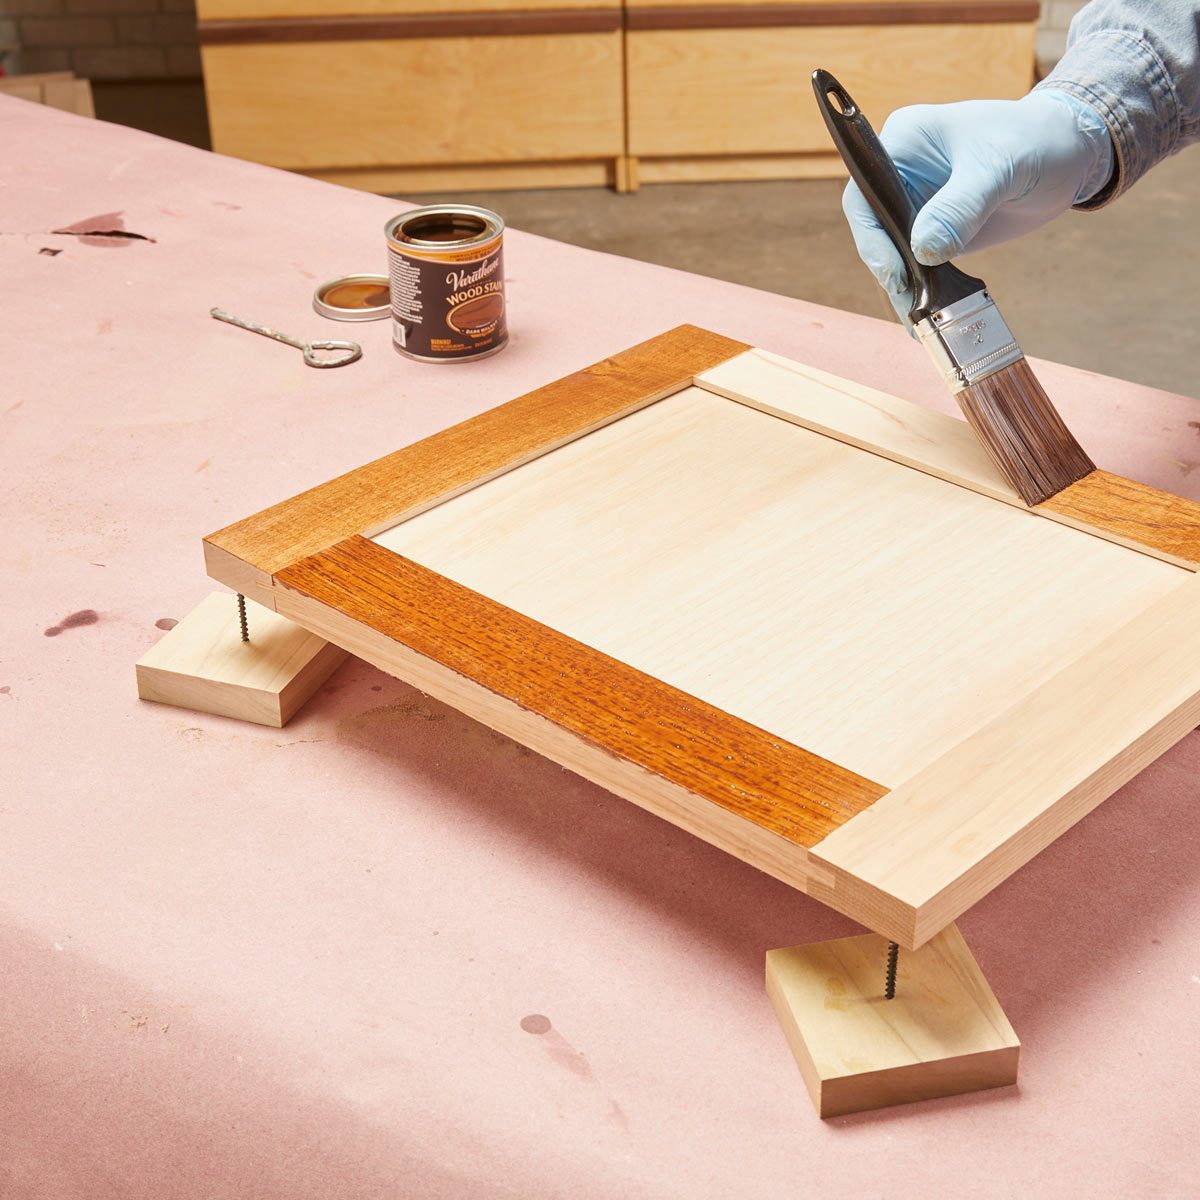 18 Handy Hints for Wood Finishing